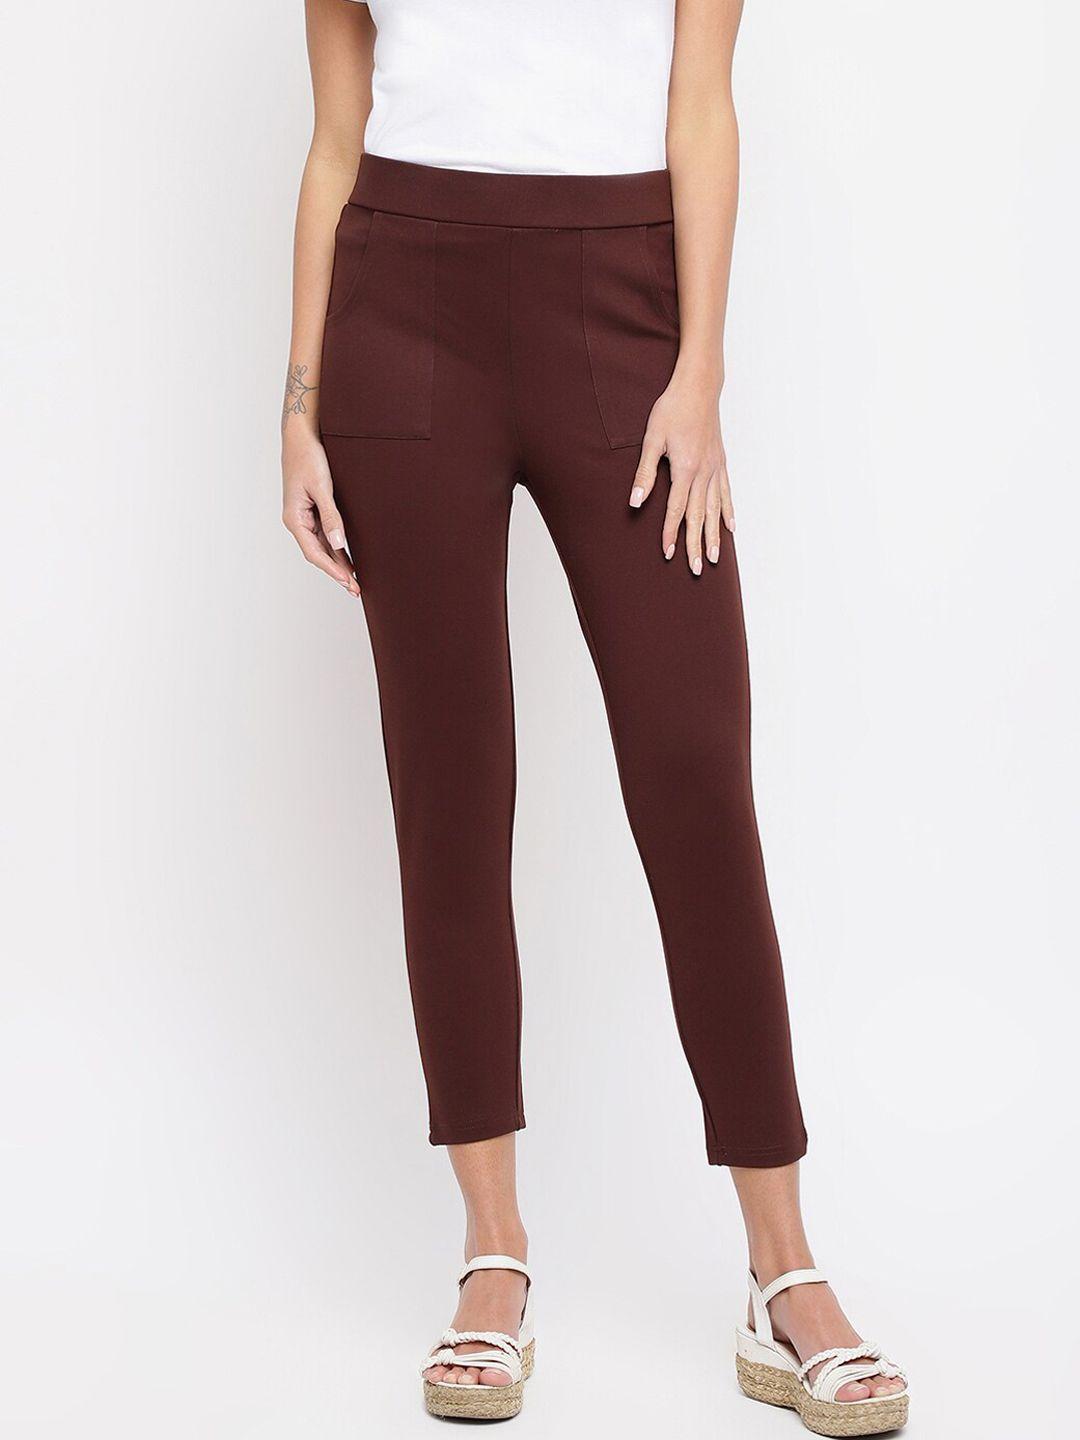 latin-quarters-women-brown-solid-jegging-with-front-pockets